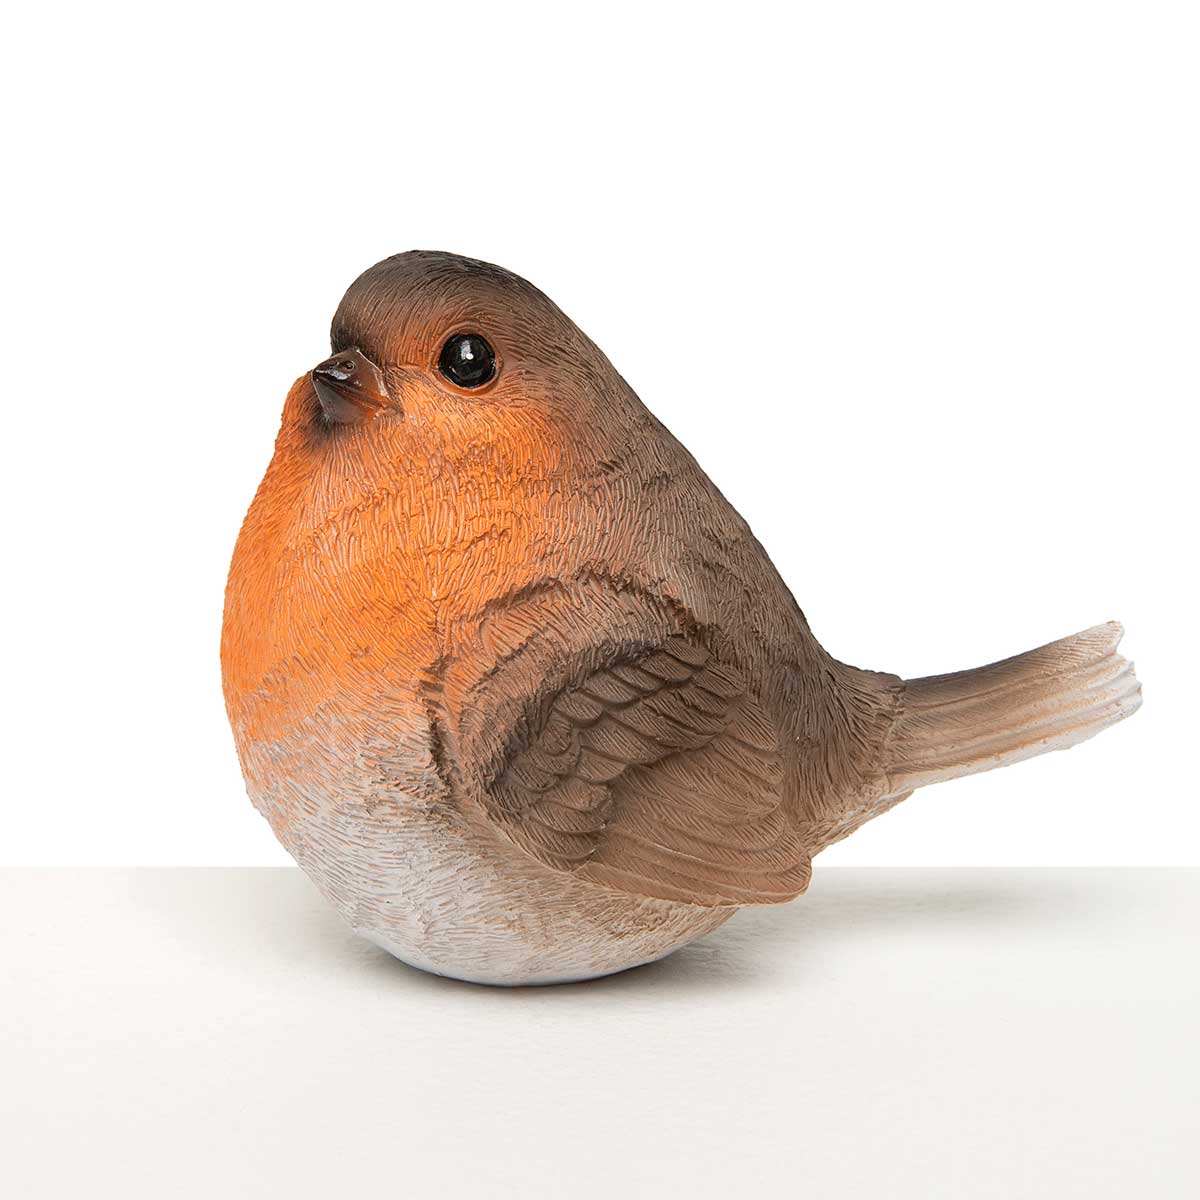 BIRD ROBIN RUST/BROWN 4.5IN X 2.5IN X 3.5IN RESIN - Click Image to Close